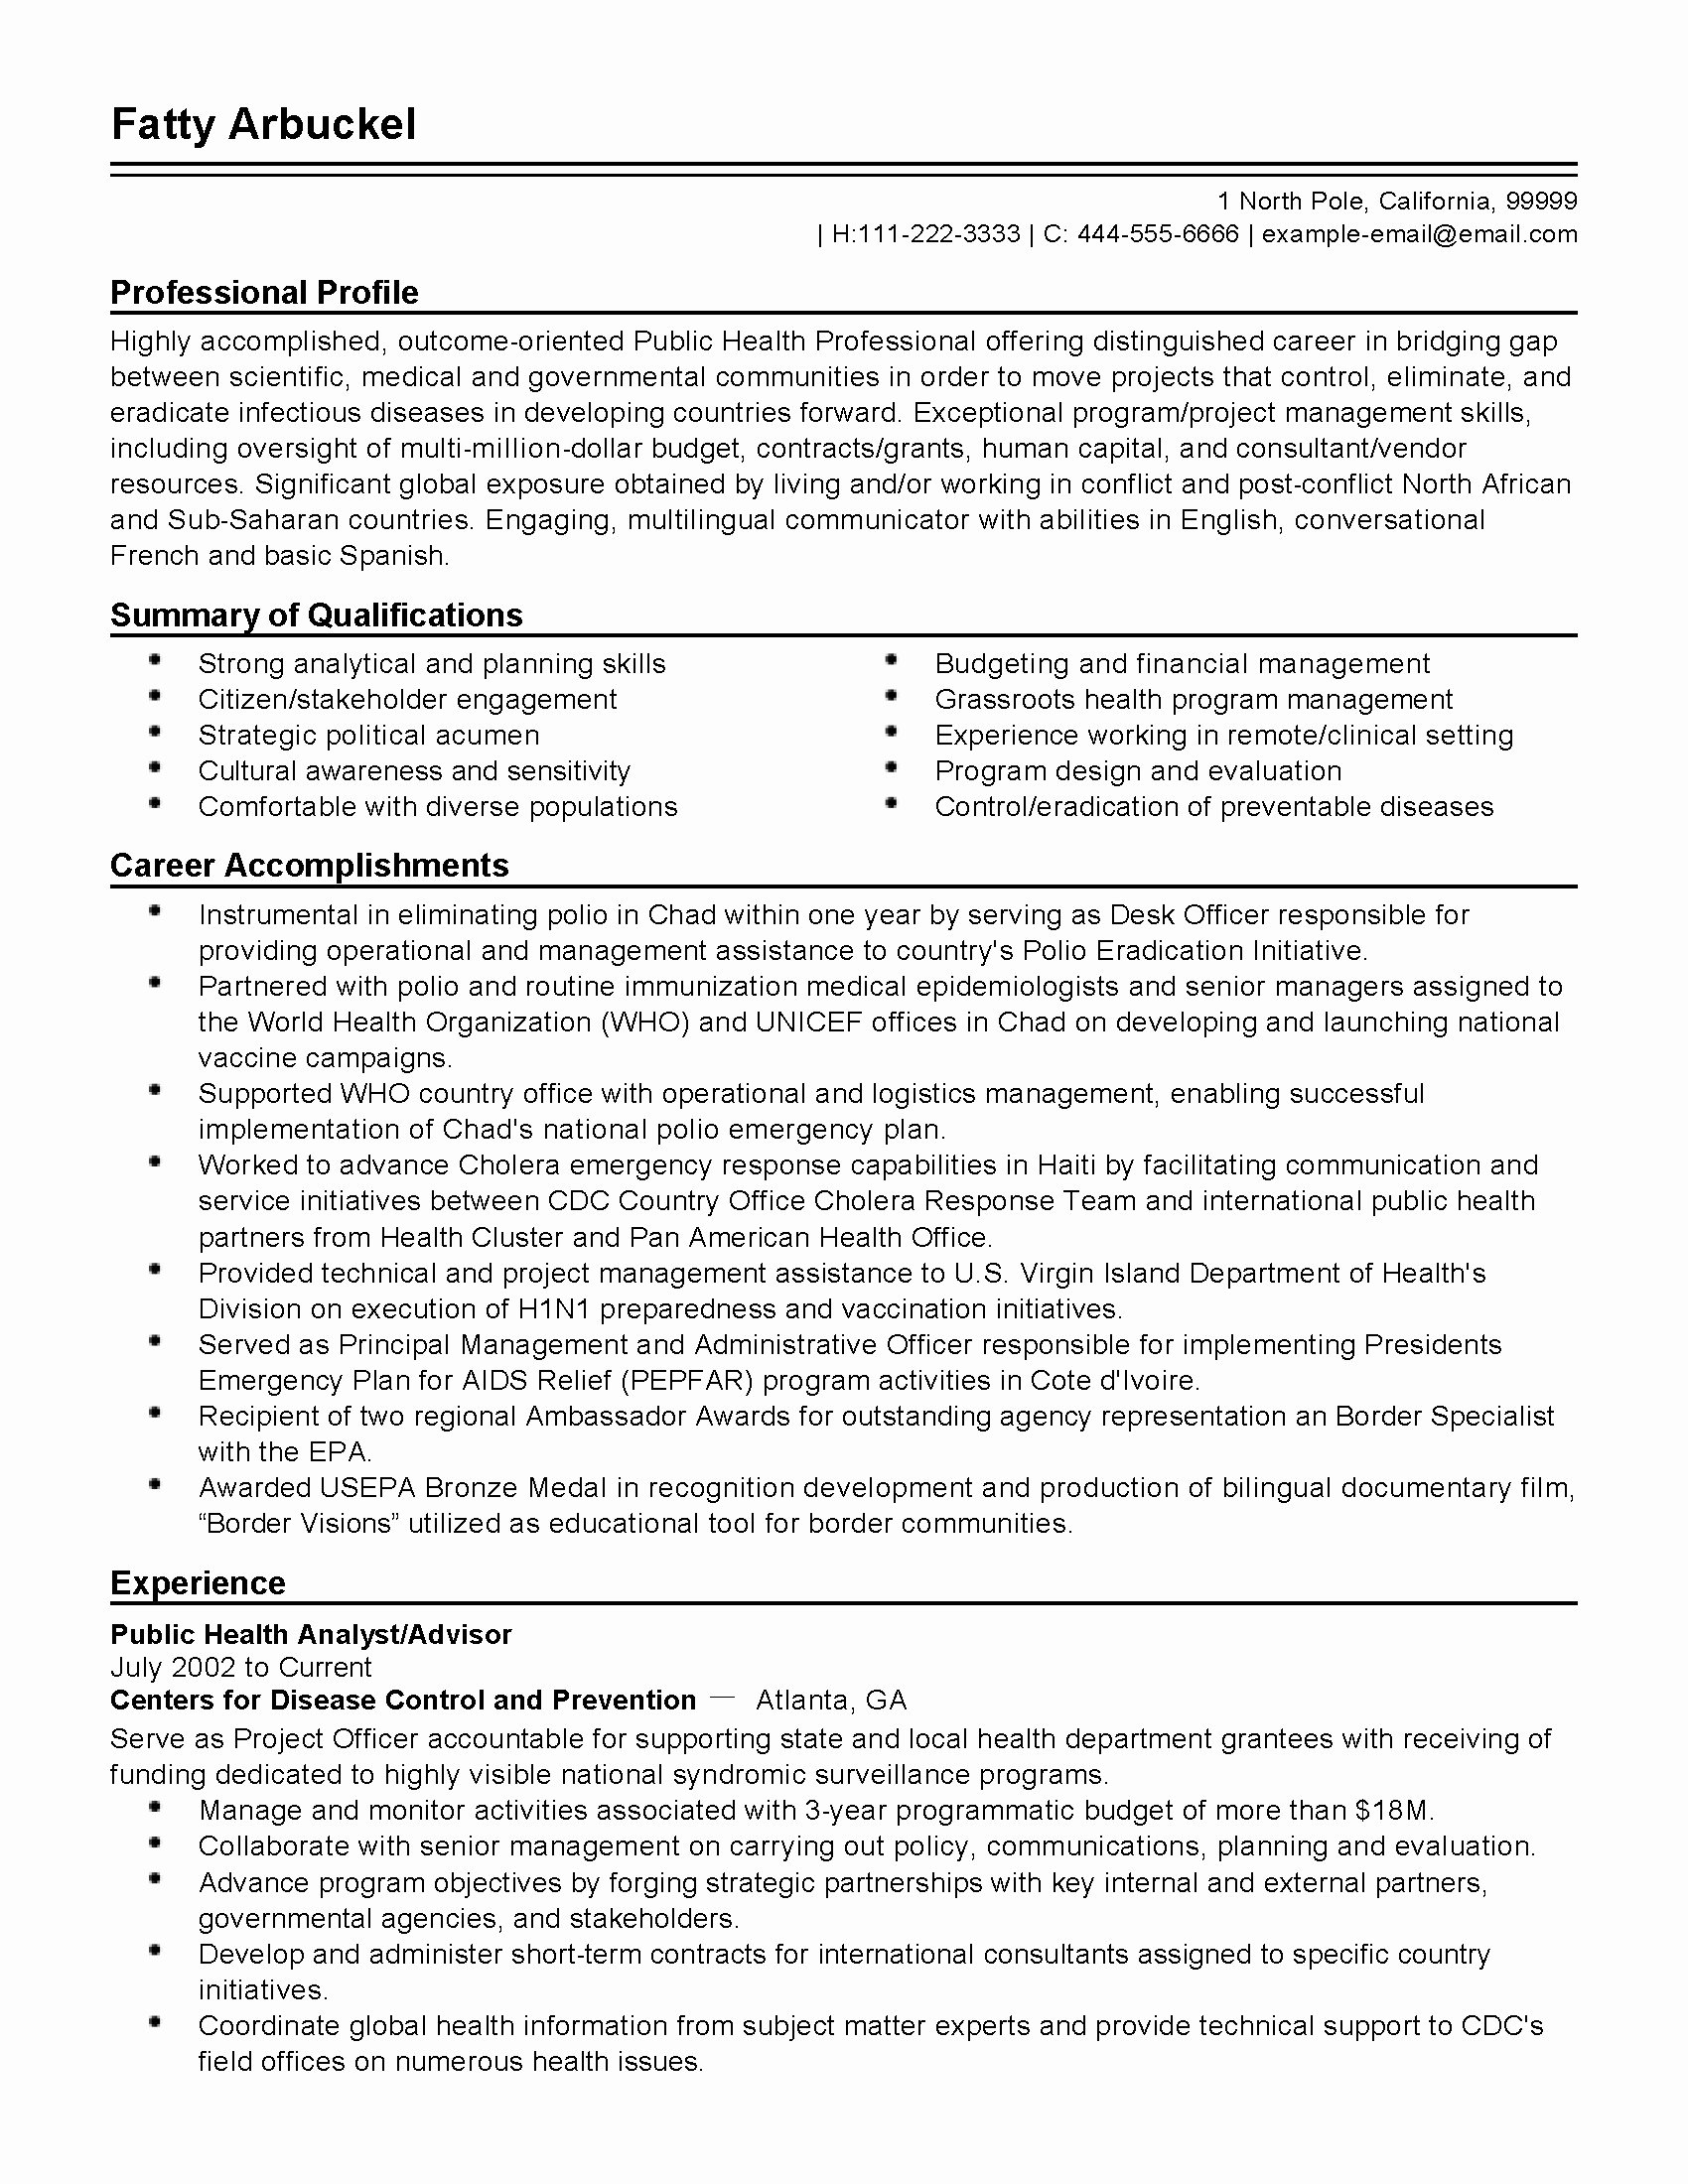 How to Write A Professional Resume Best 44 Great Help